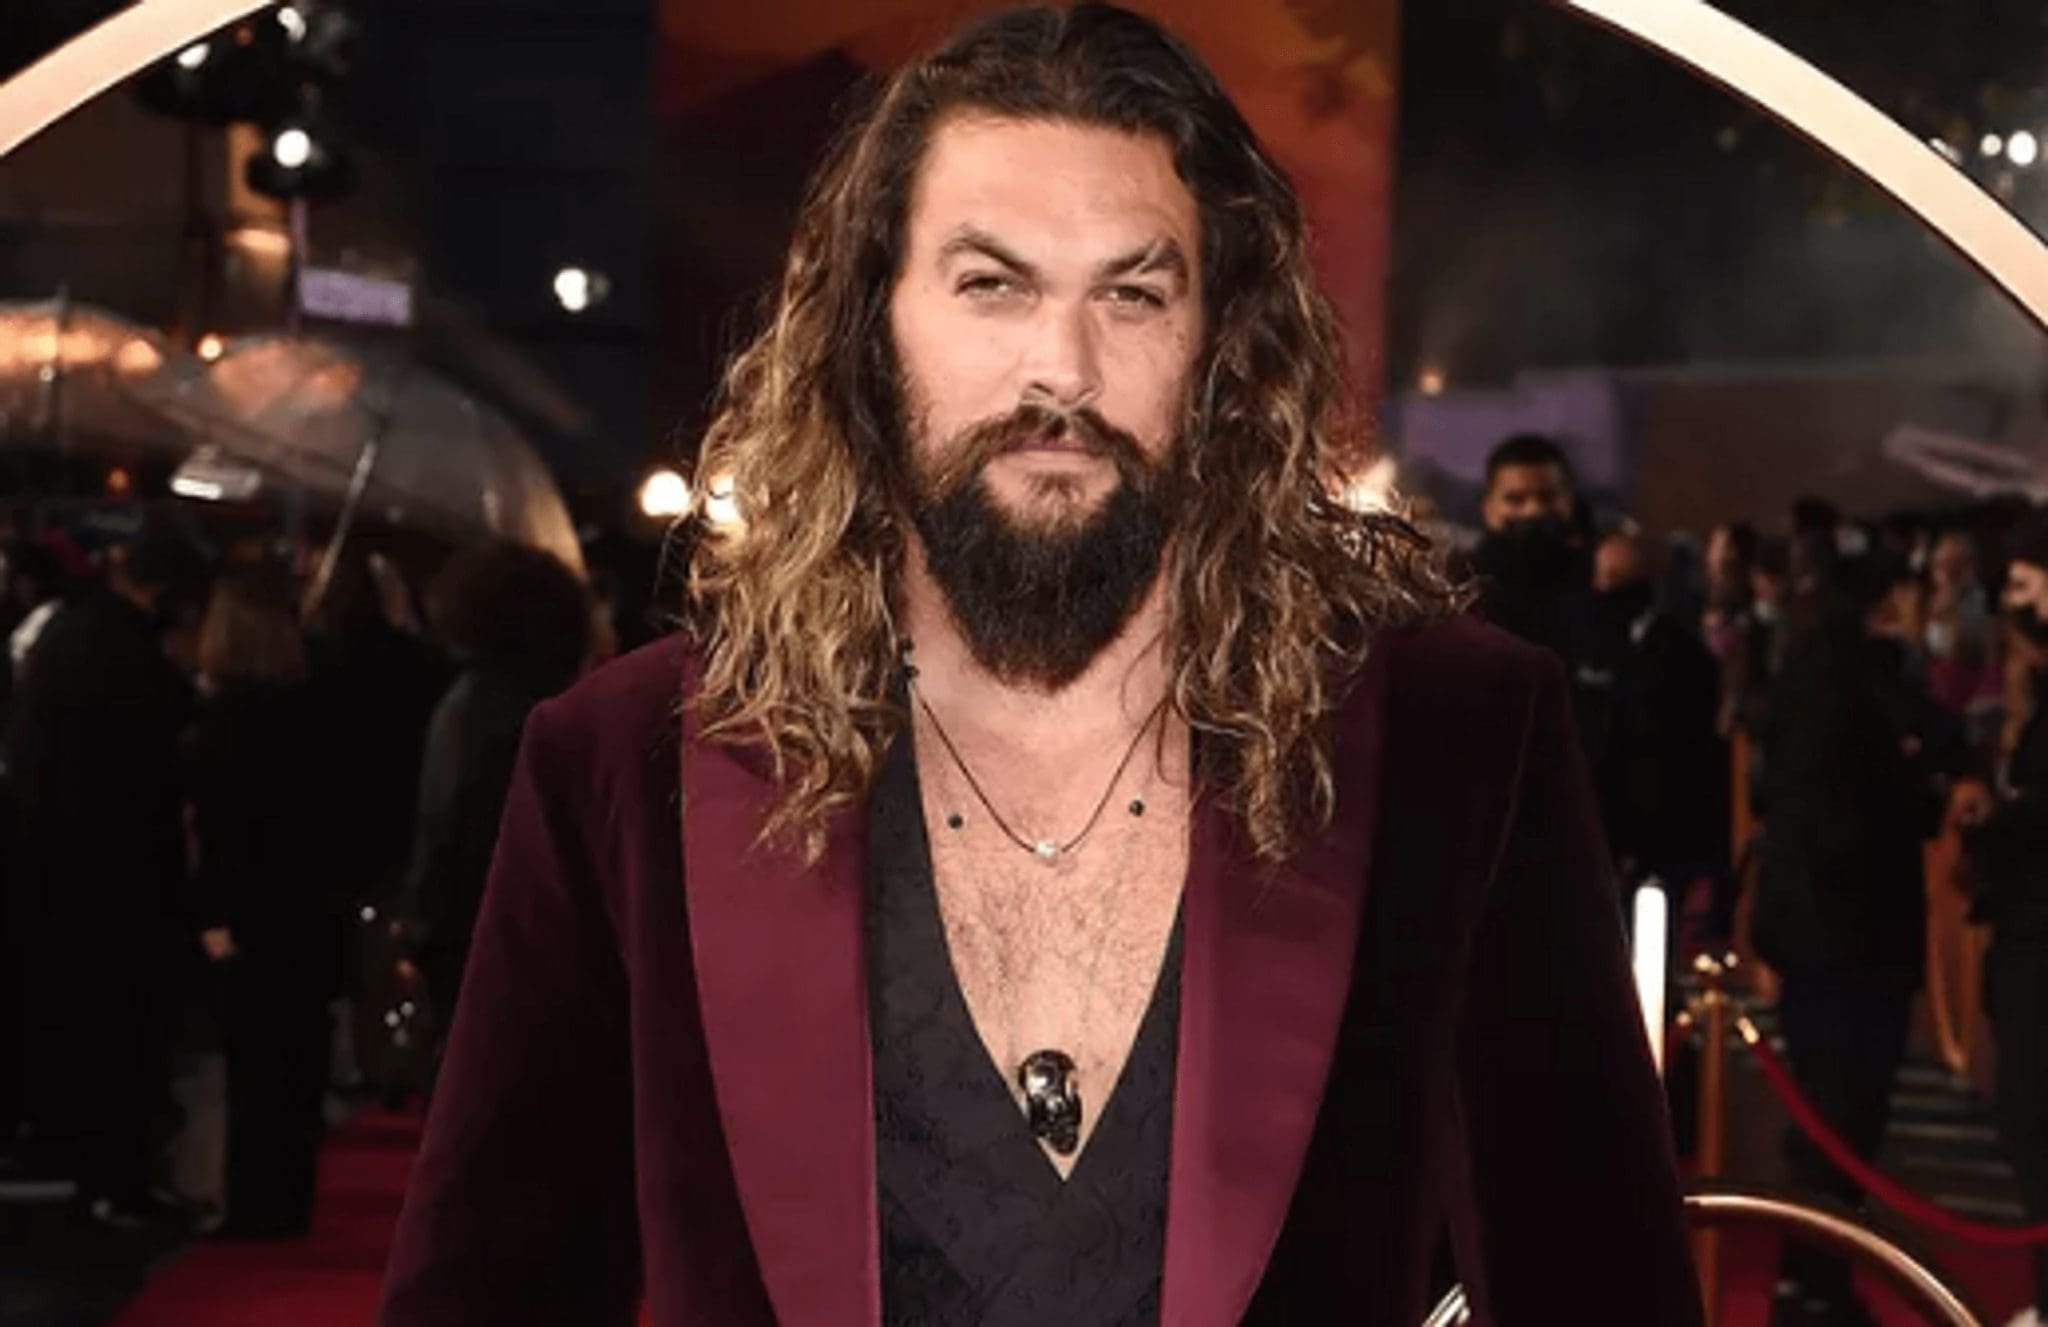 Director Of Conan Marcus Nispel Reacts To Jason Momoa's Claims That The Movie Was Terrible